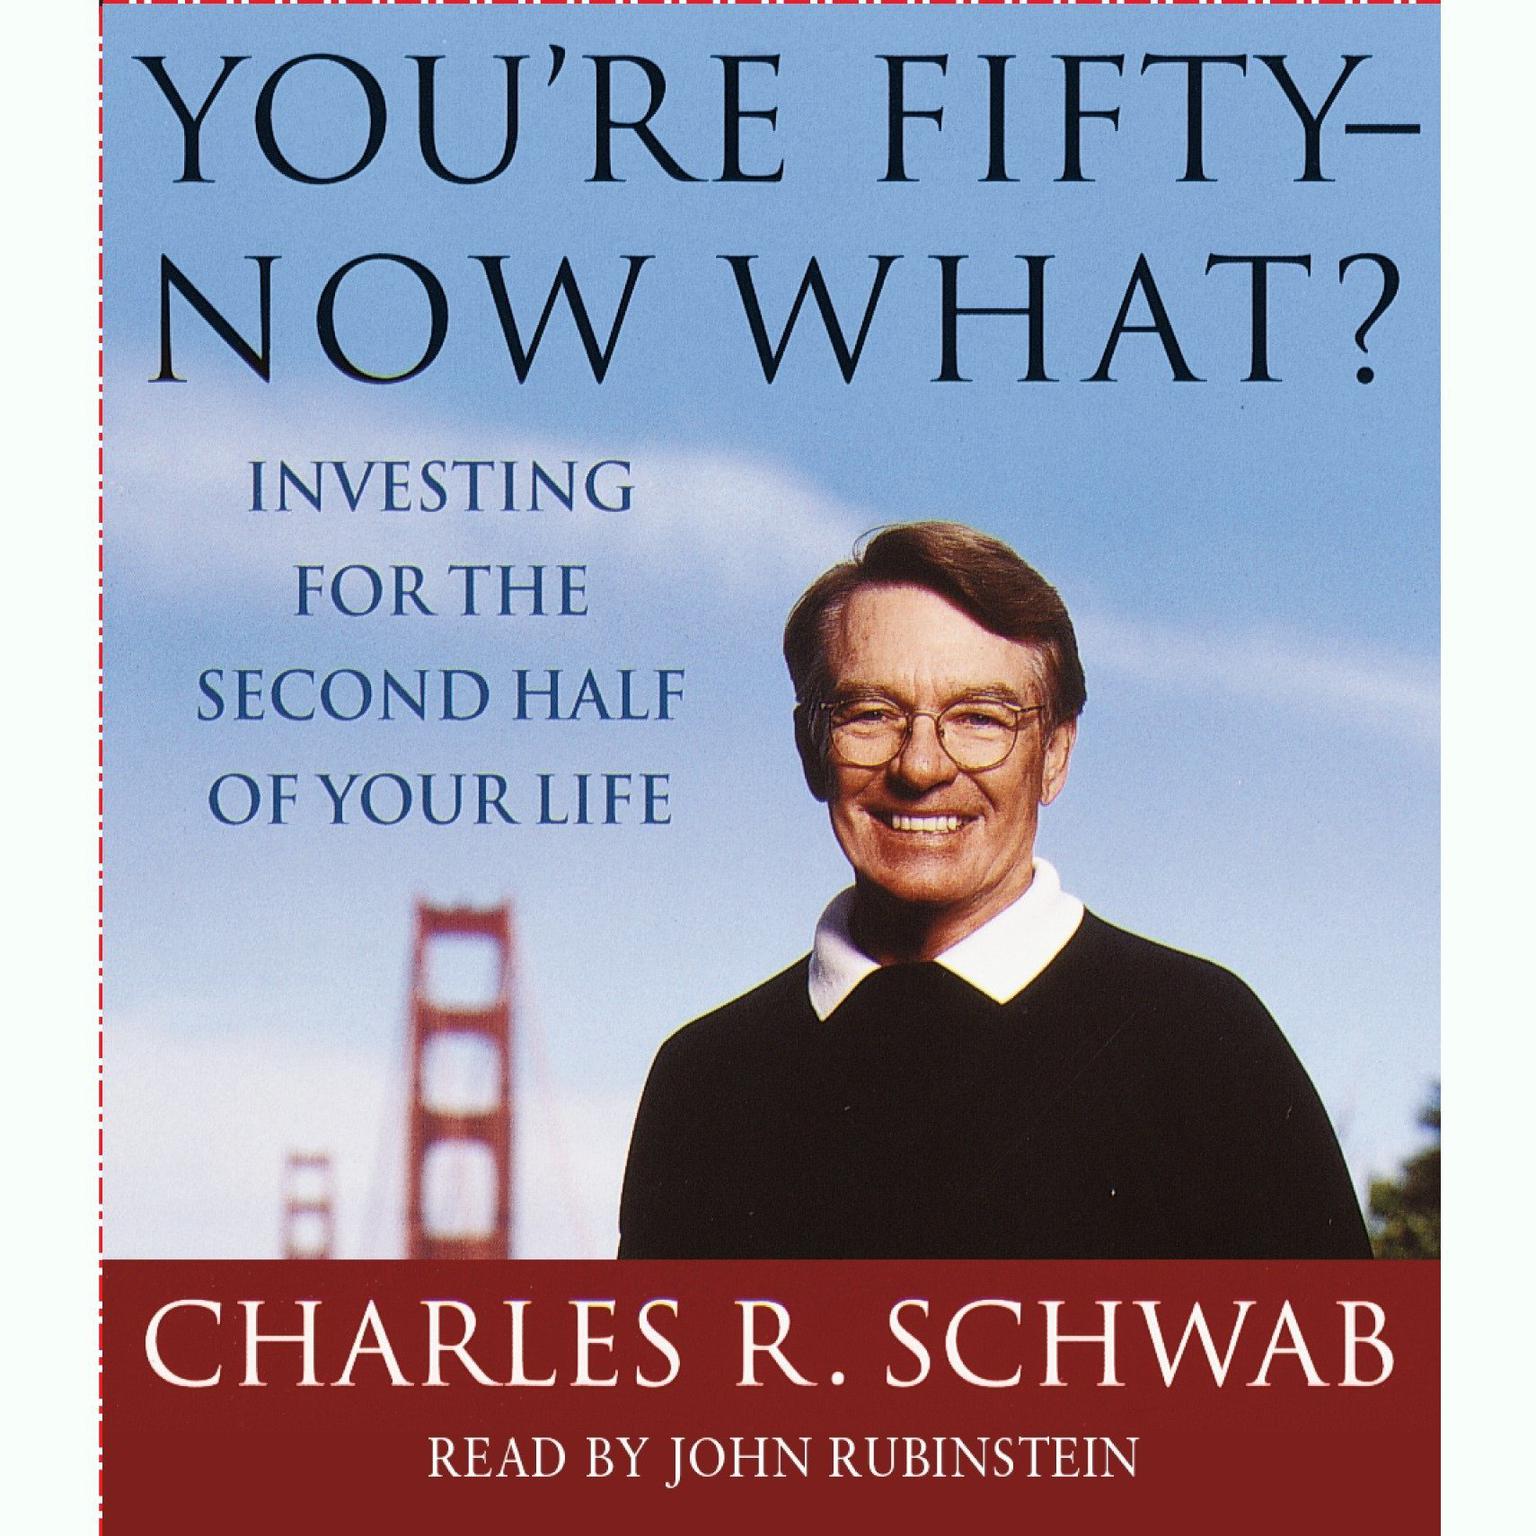 Youre Fifty--Now What (Abridged): Investing for the Second Half of Your Life Audiobook, by Charles R. Schwab